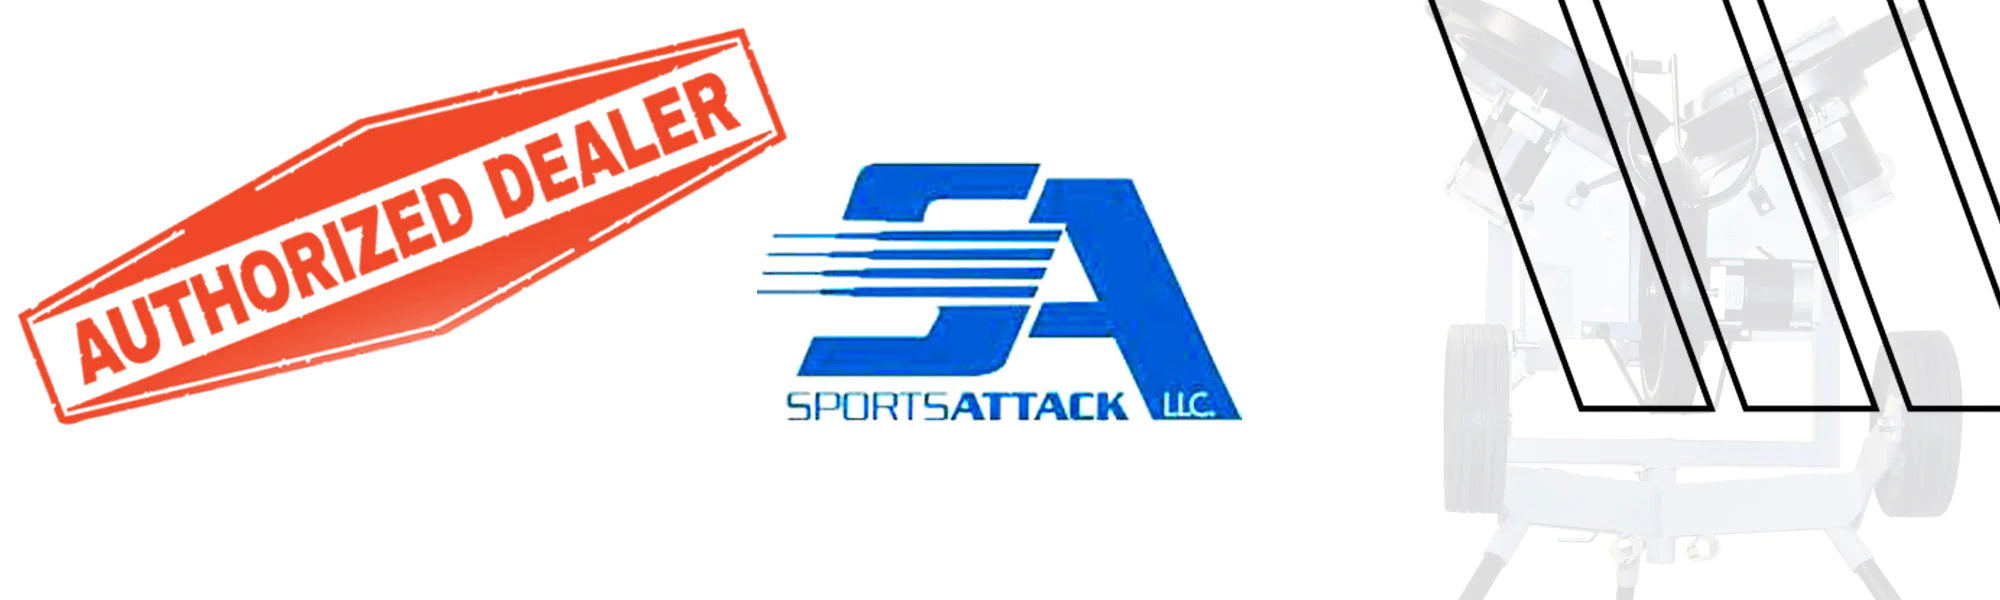 Sports Attack - Hack Attack Pitching Machines